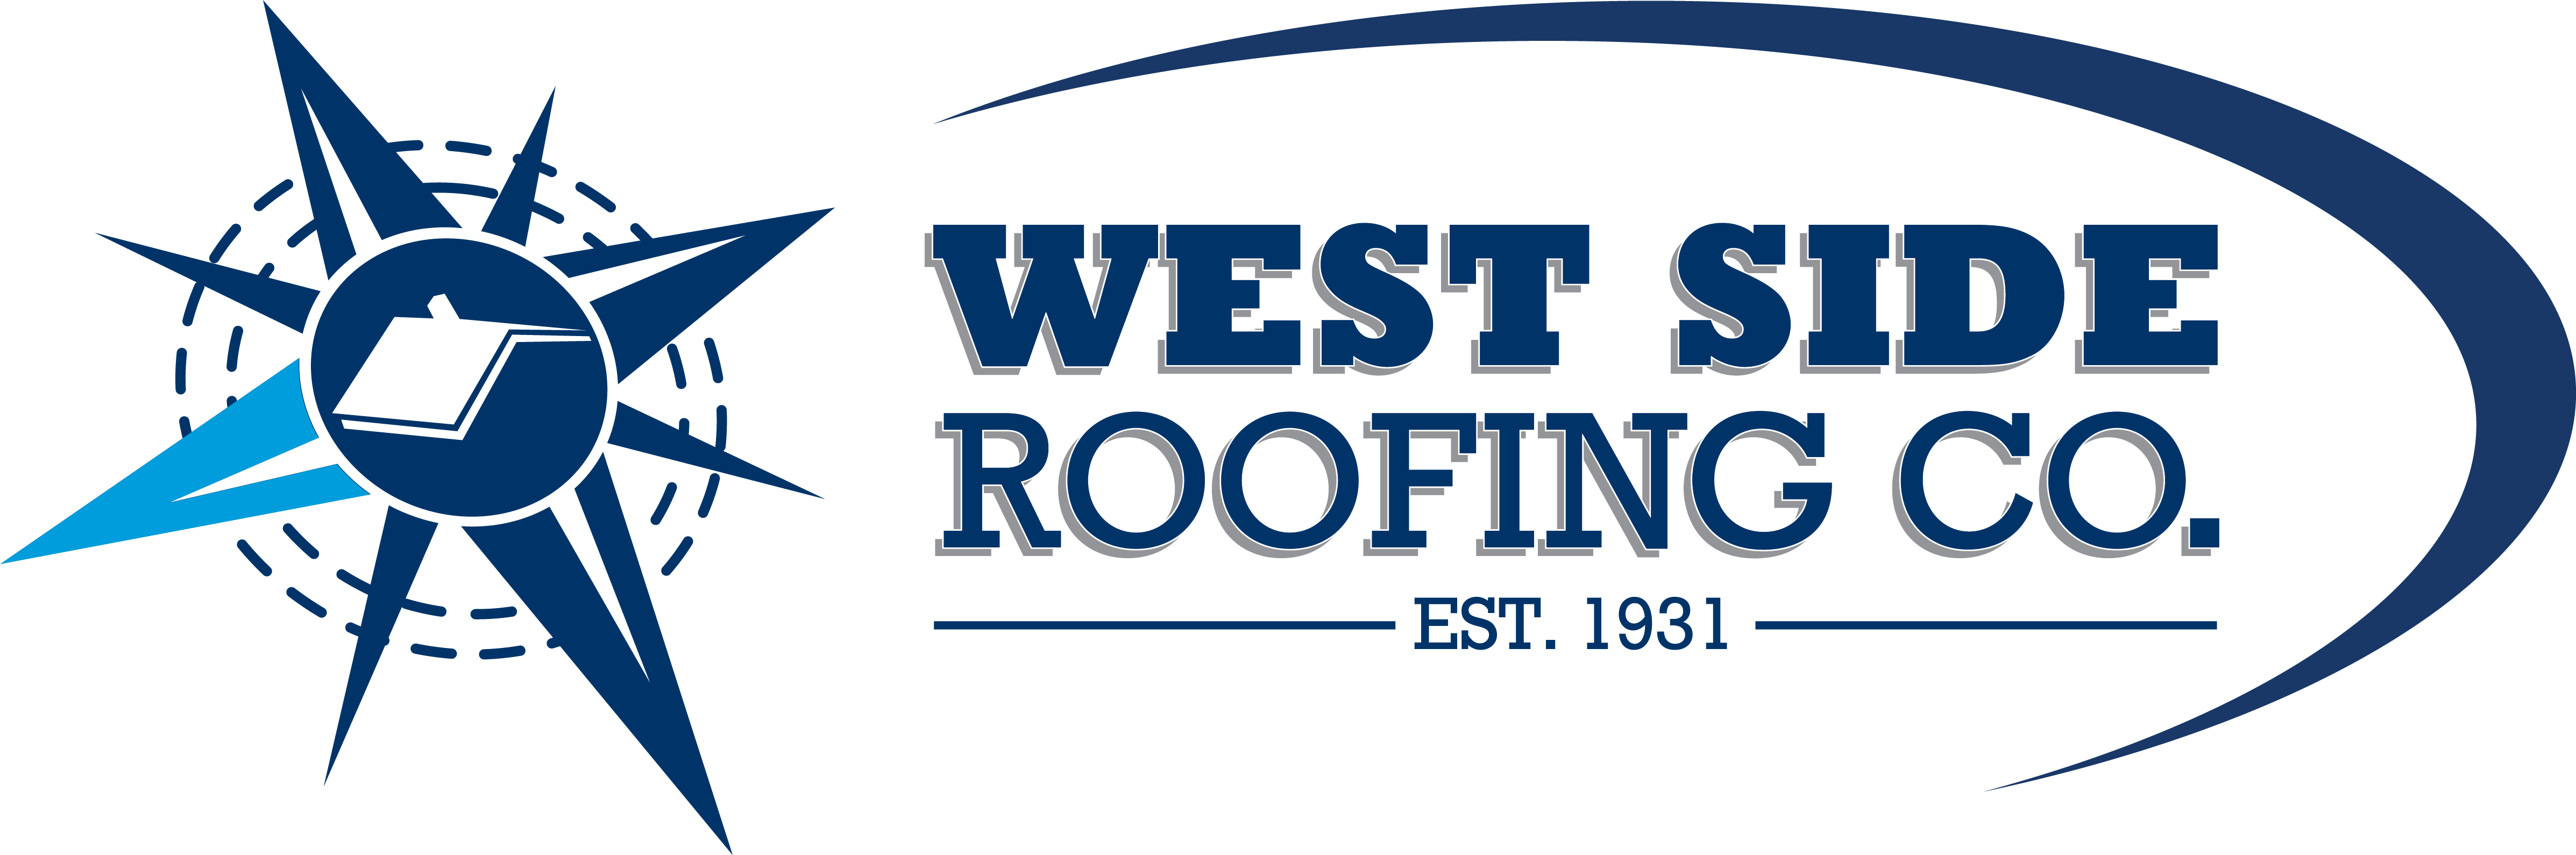 West Side Roofing